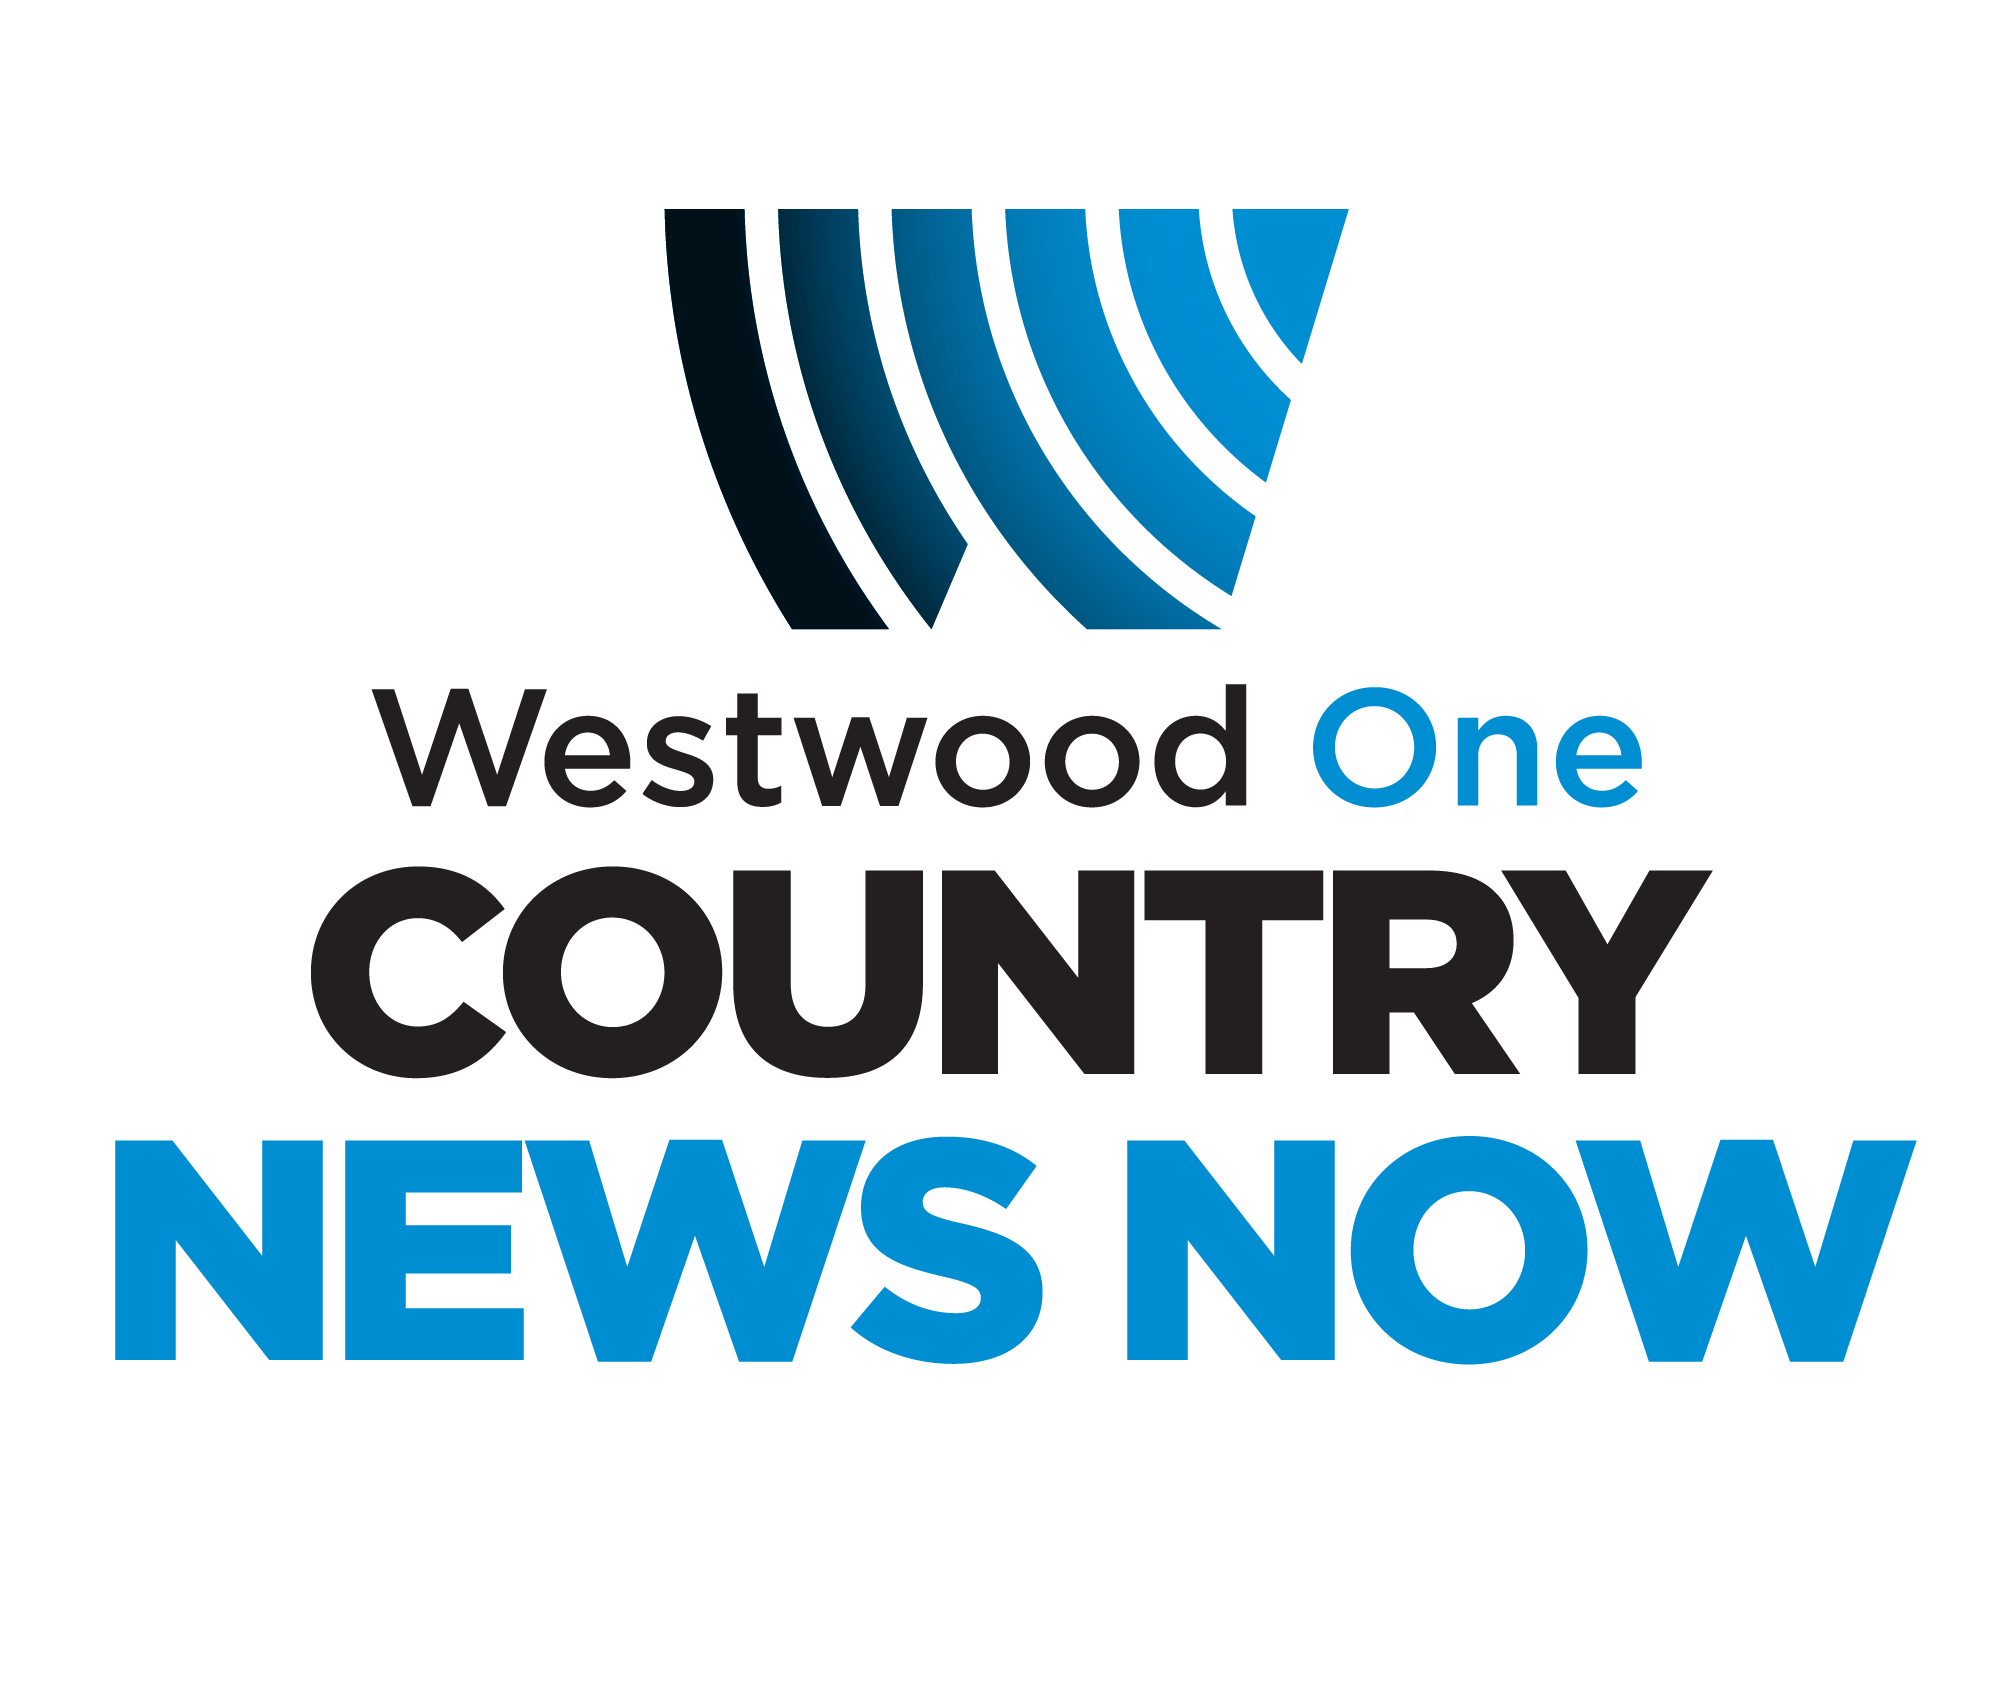 Westwood One Country News Now